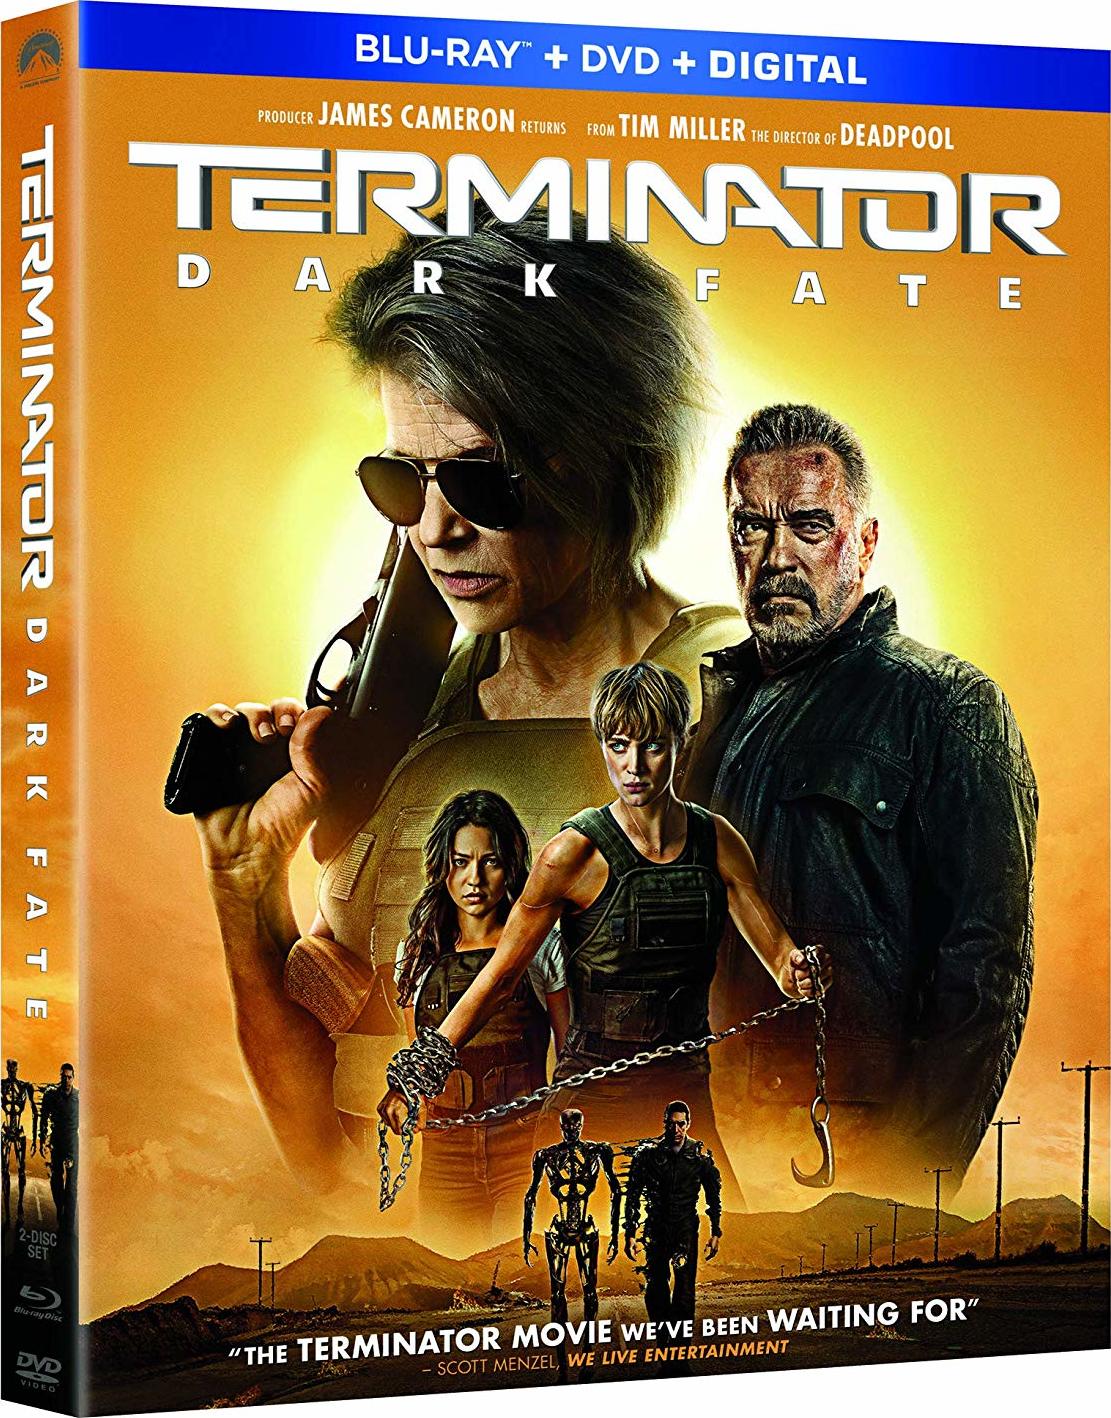 Terminator: Dark Fate, now available on Blu-ray and DVD